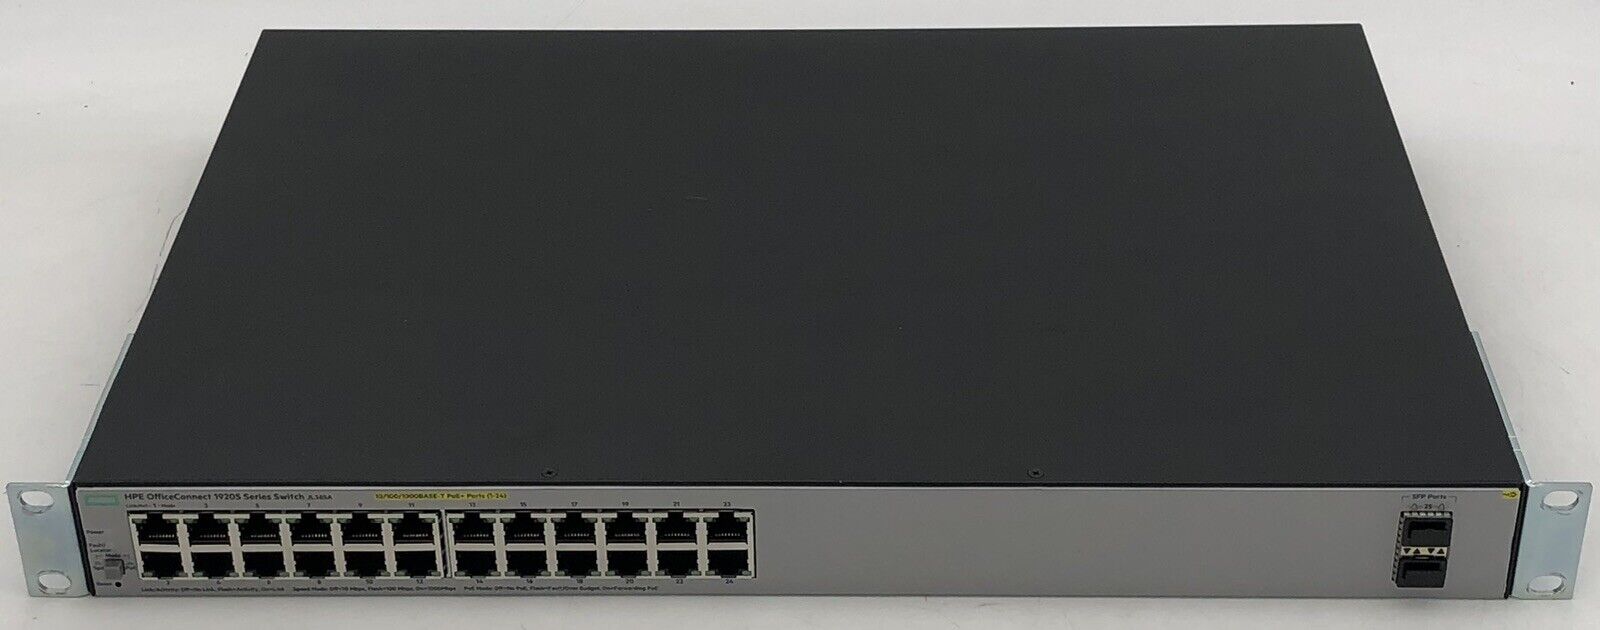 HPE OfficeConnect 1920S Series Switch JL385A 10/100/100BASE-T PoE+ Ports (1-24)